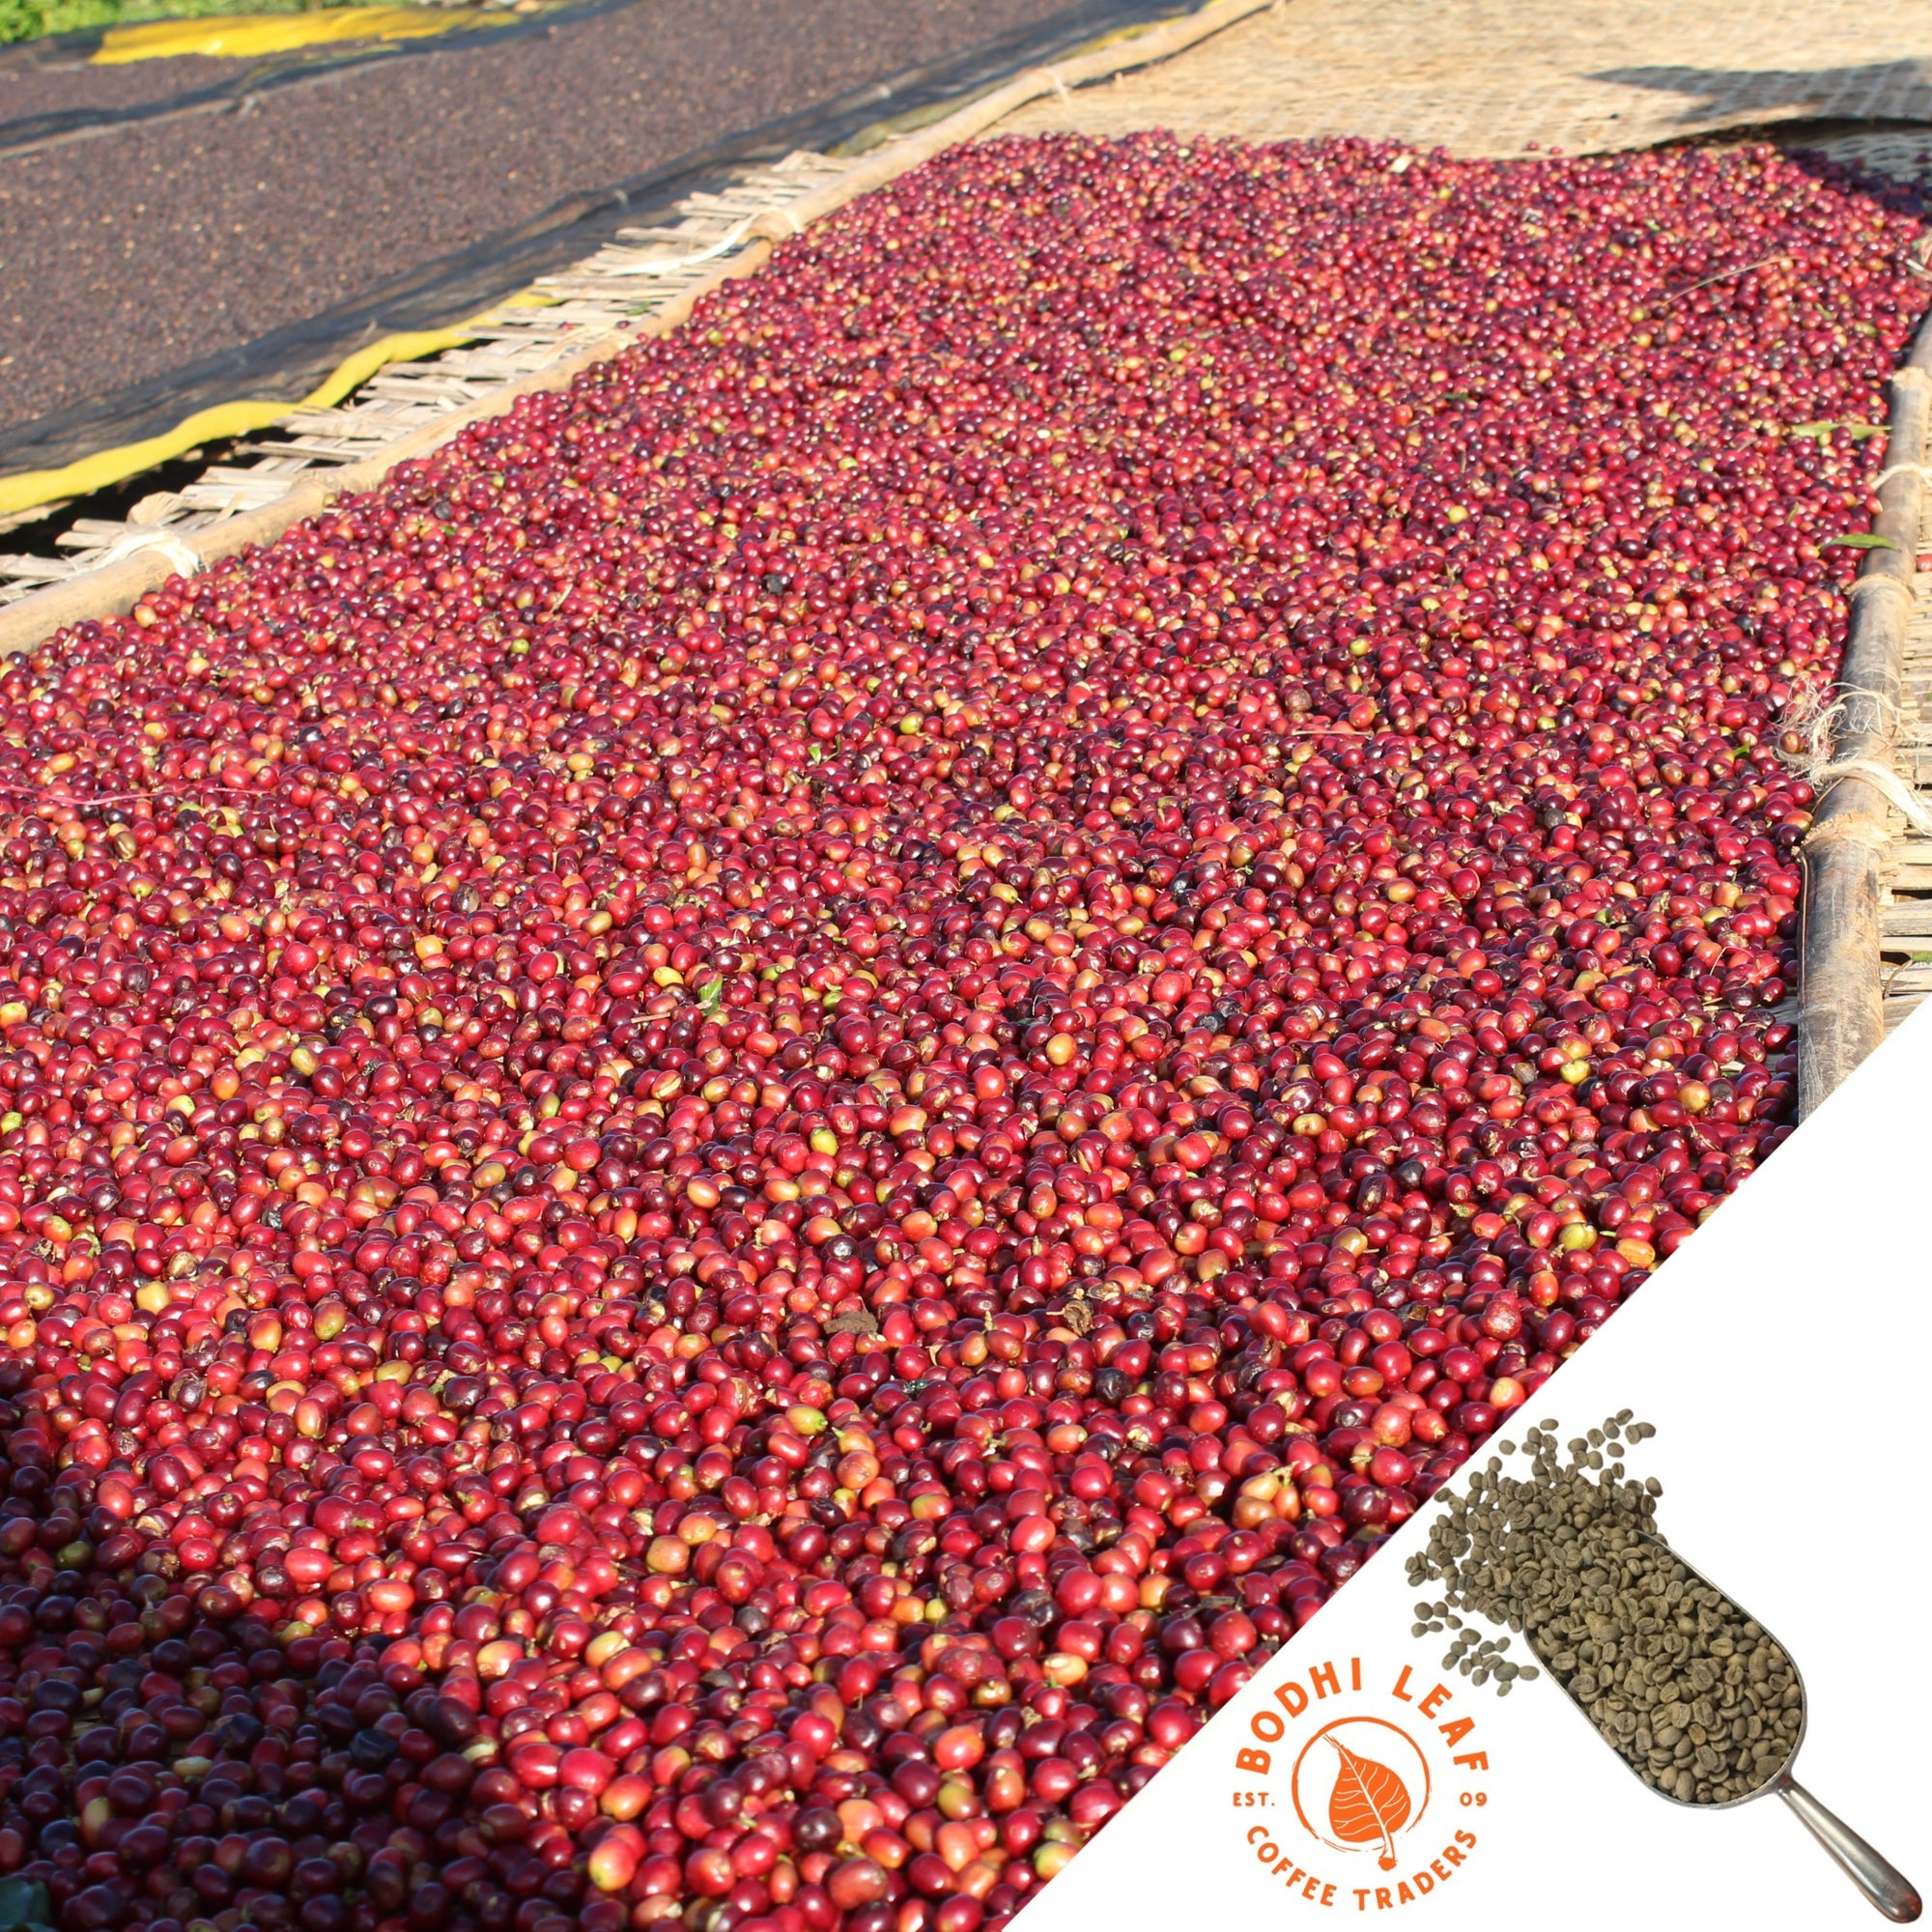 Bed of bright red coffee cherries laying out to dry